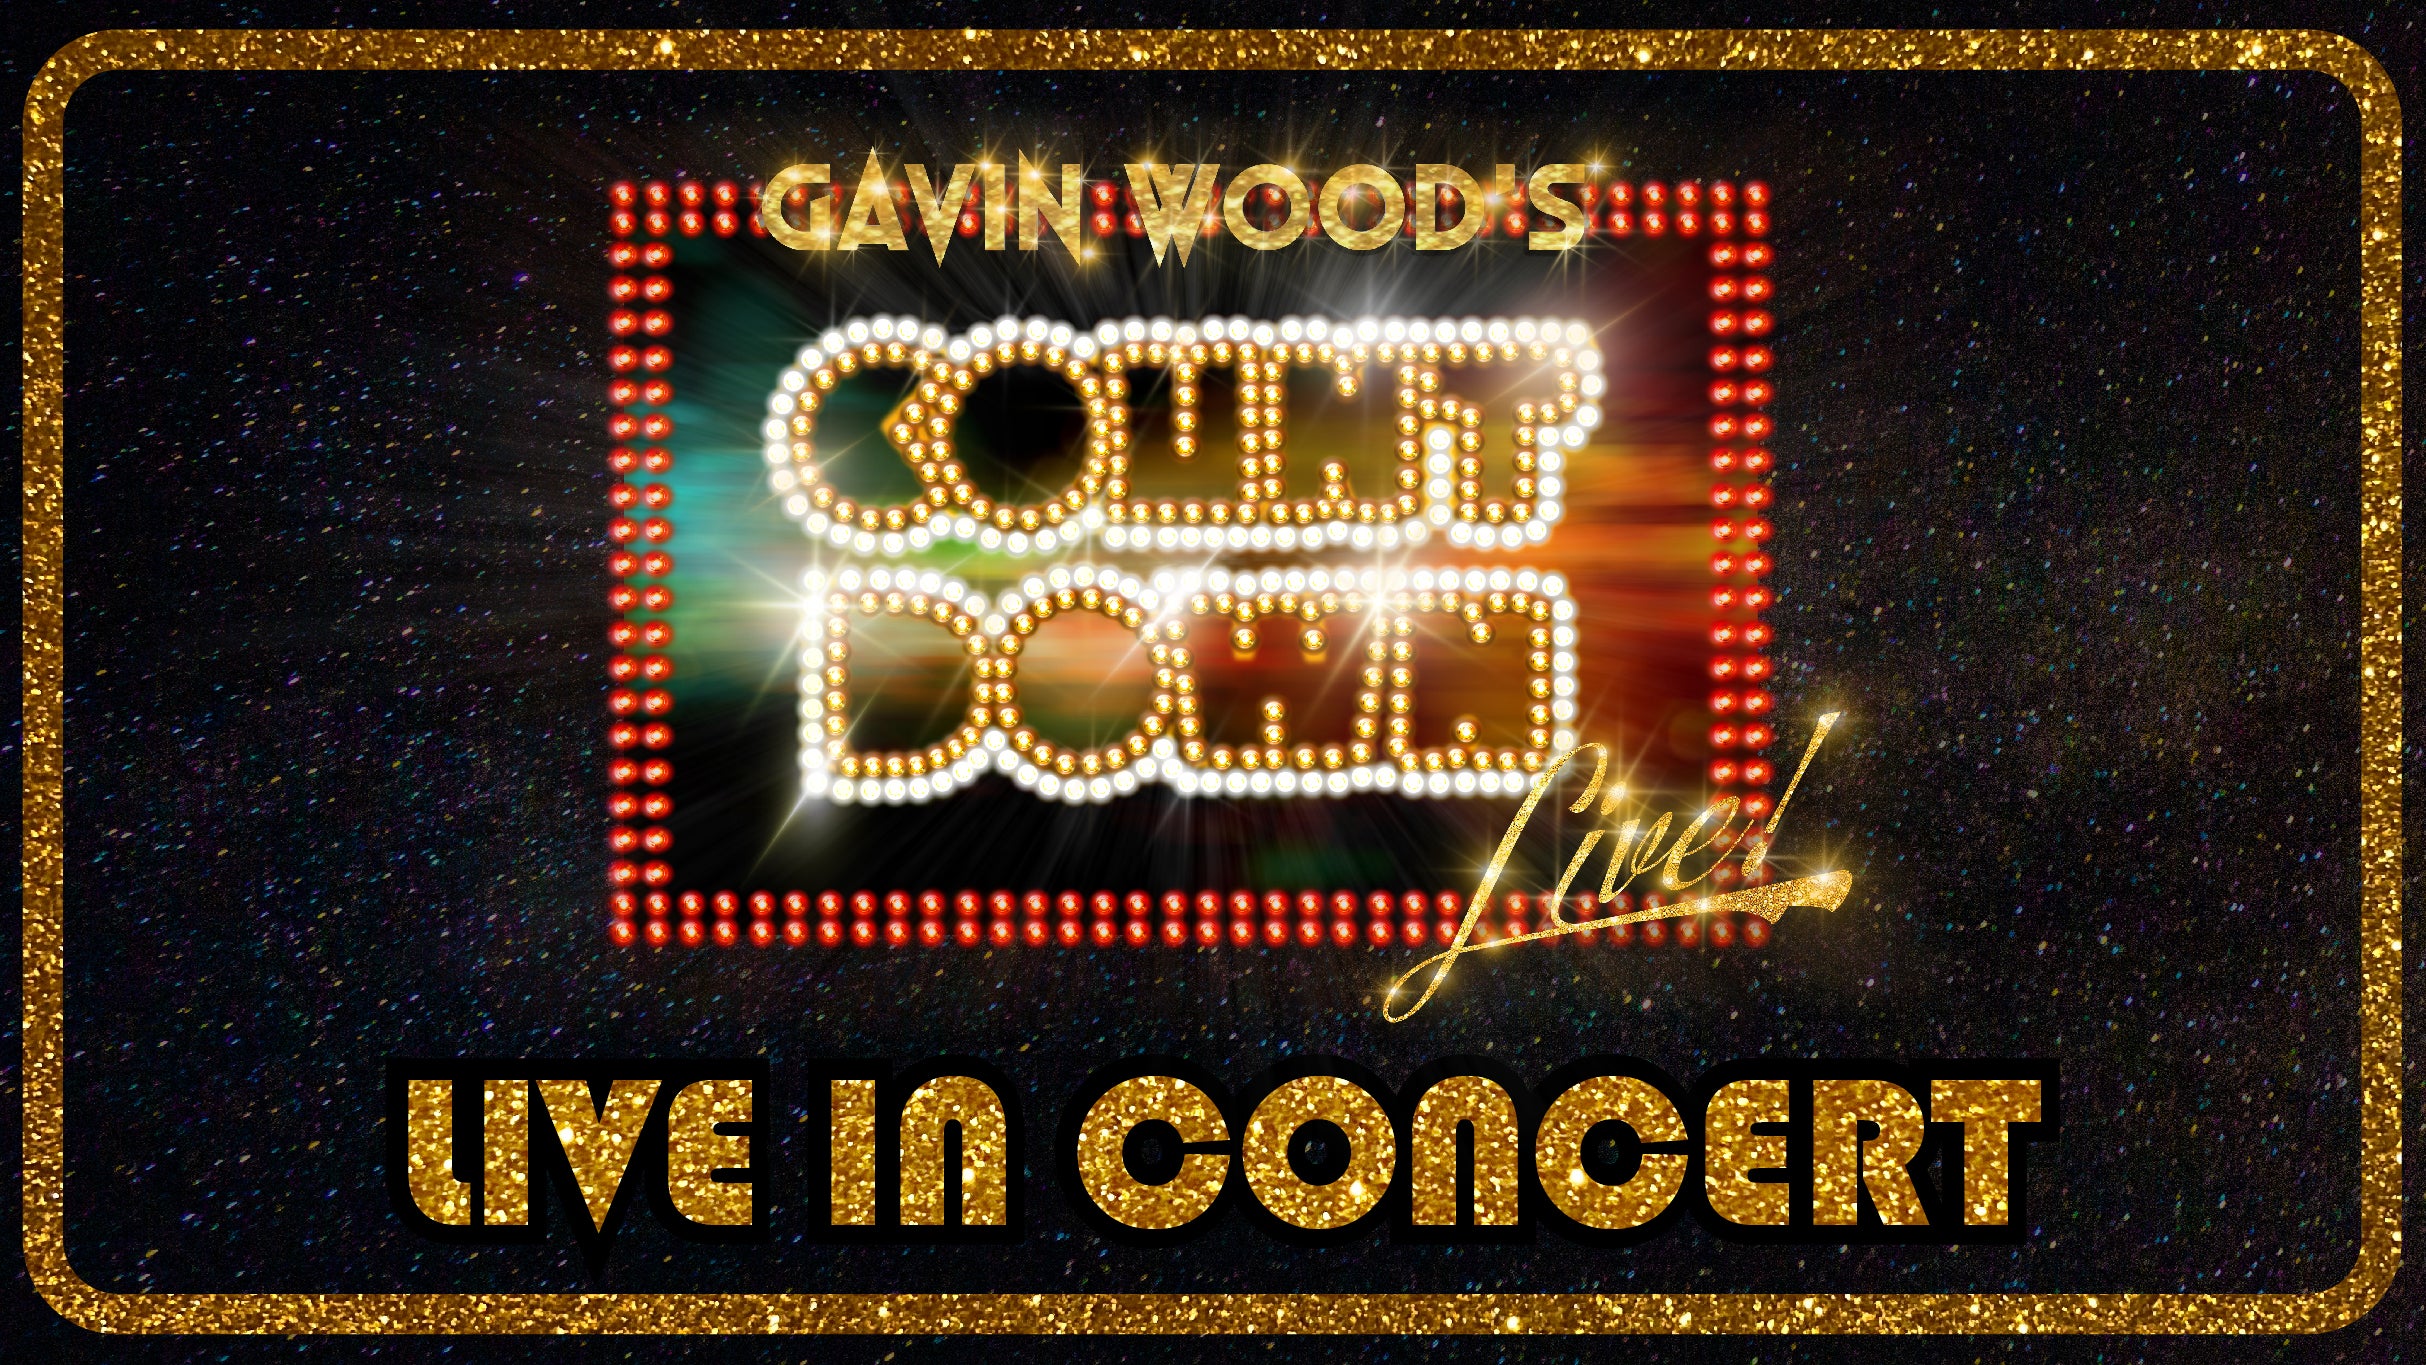 Image used with permission from Ticketmaster | Gavin Woods COUNTDOWN Live in Concert tickets